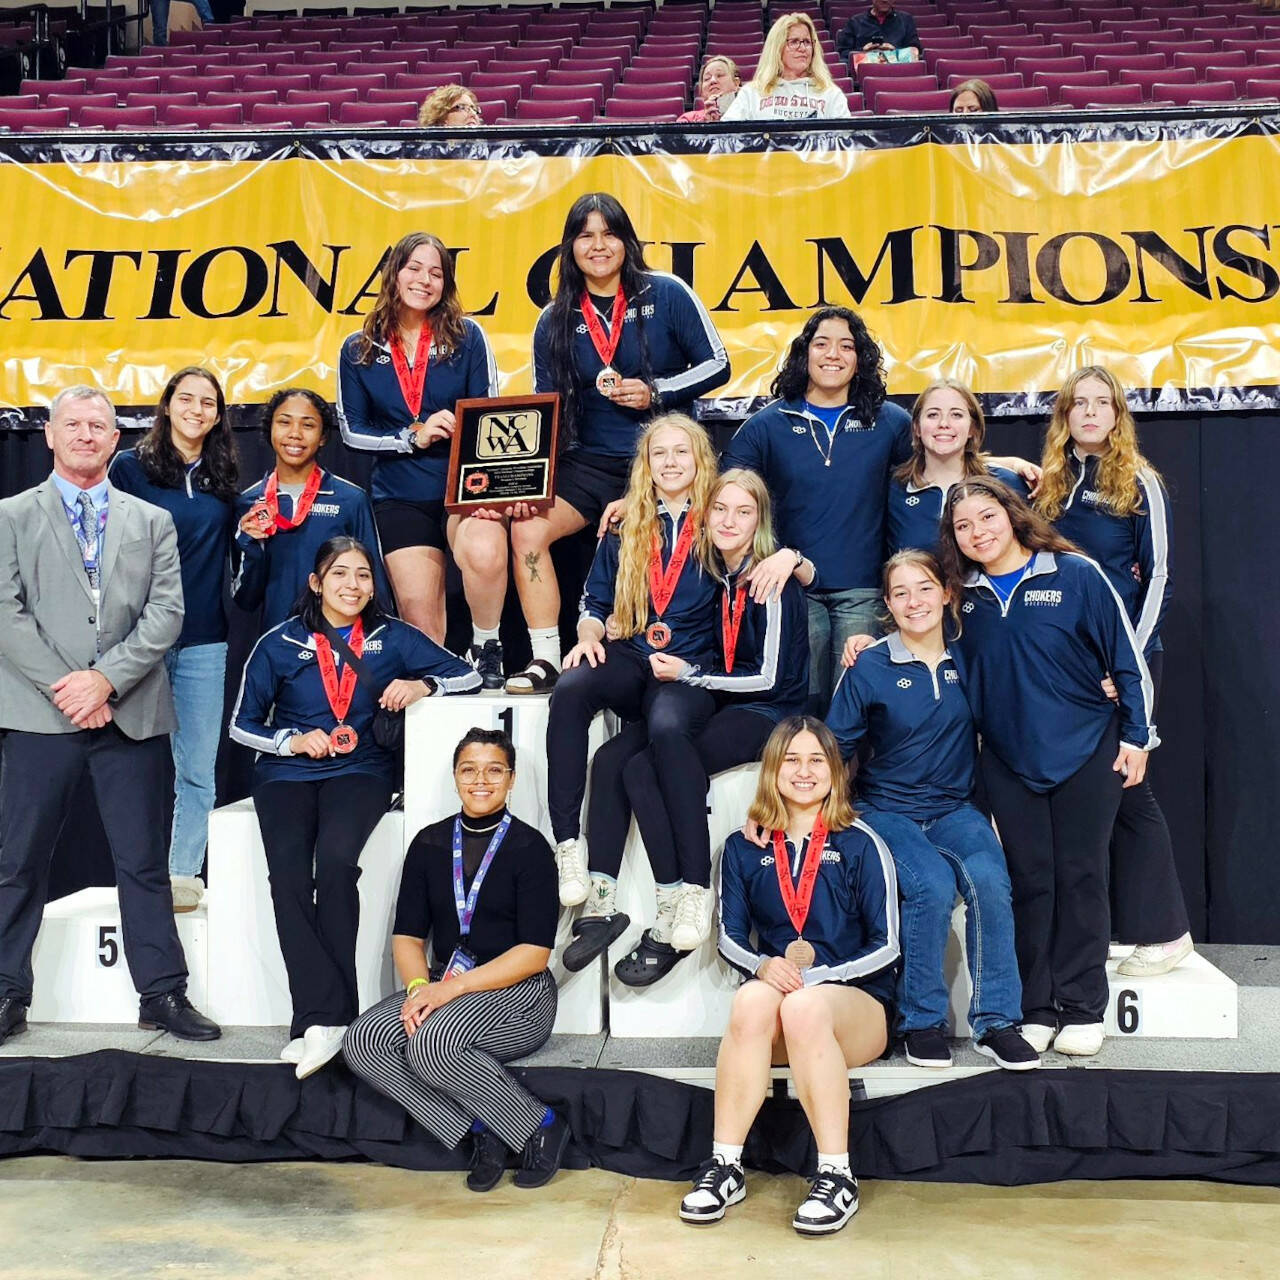 SUBMITTED PHOTO Led by national champions Renaeh Ureste (top left) and JoJera Dodge (top right), the Grays Harbor College women’s wrestling team won the NCWA National Championship on Saturday in Bossier City, Louisiana. Head coach Kevin Pine (far left) was named National Women’s Coach of the Year.